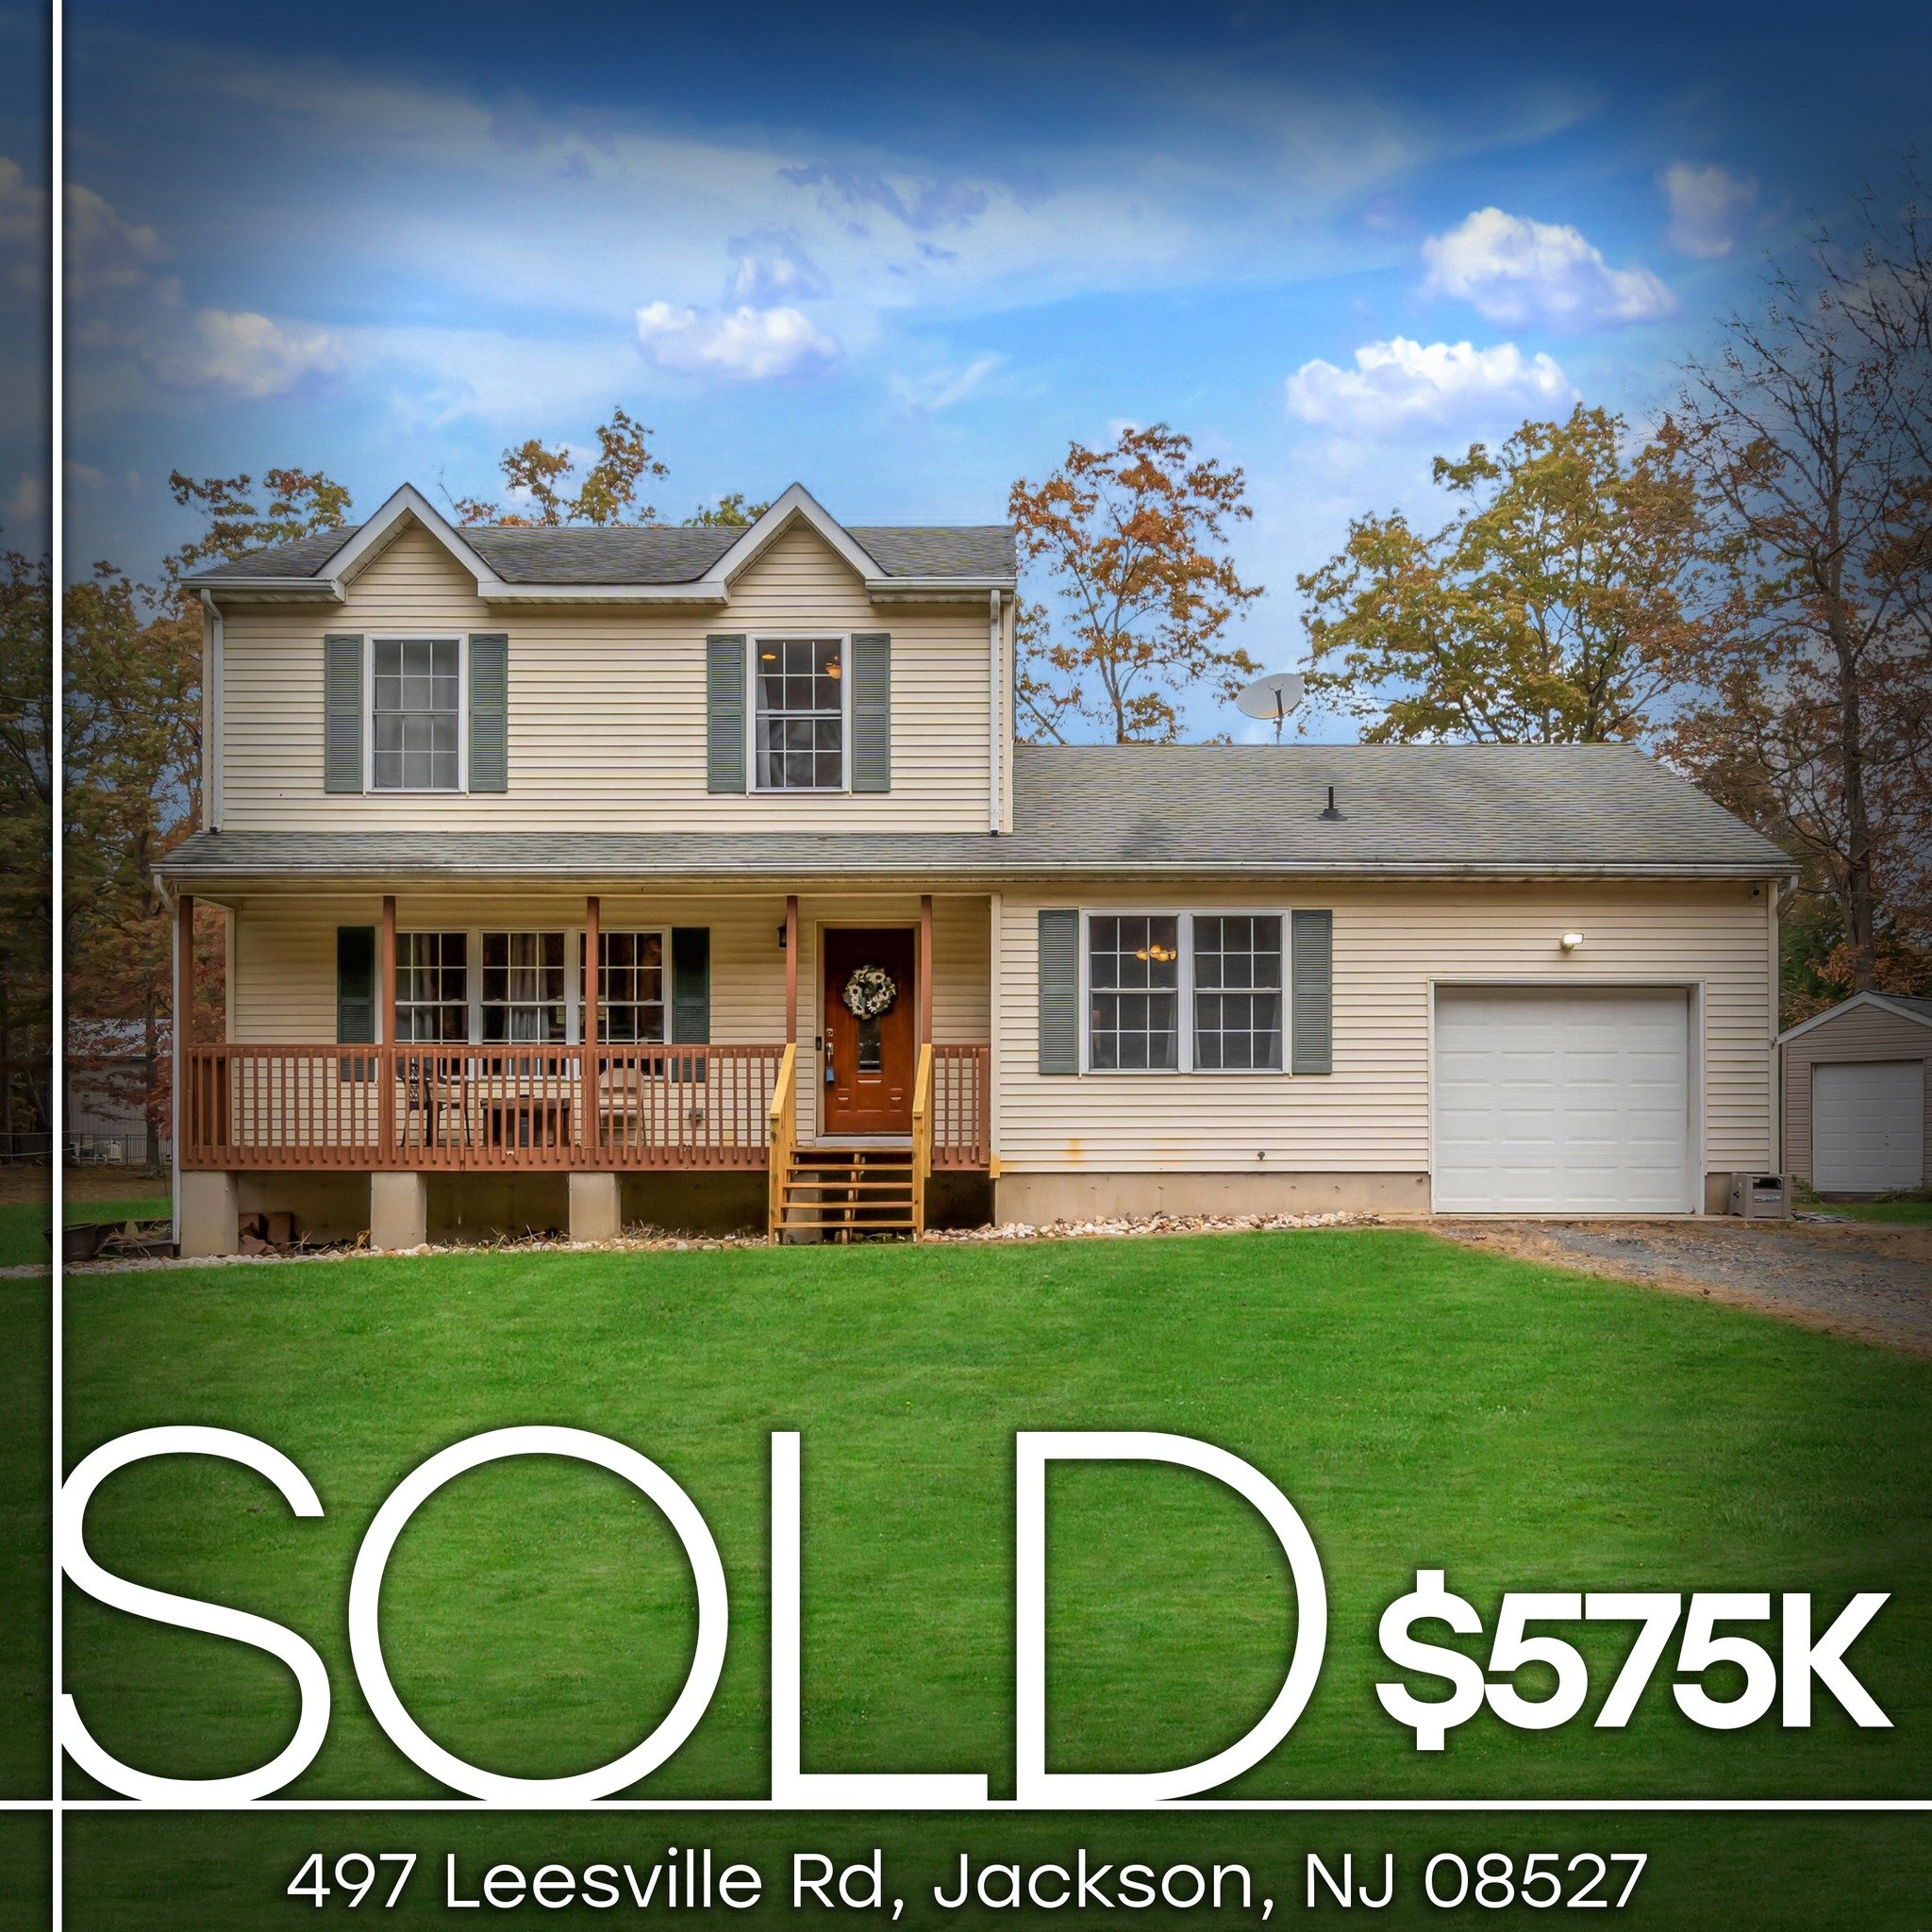 💥JUST SOLD!💥
📍497 Leesville Rd, Jackson, NJ 08527
3 Bed | 1.5 Bath | 1,710Ft.&sup2;

Thrilled to share the news! 🏡✨ Another success story as this colonial gem nestled on an acre in Jackson Township's Leesville area has Officially Sold! With its c